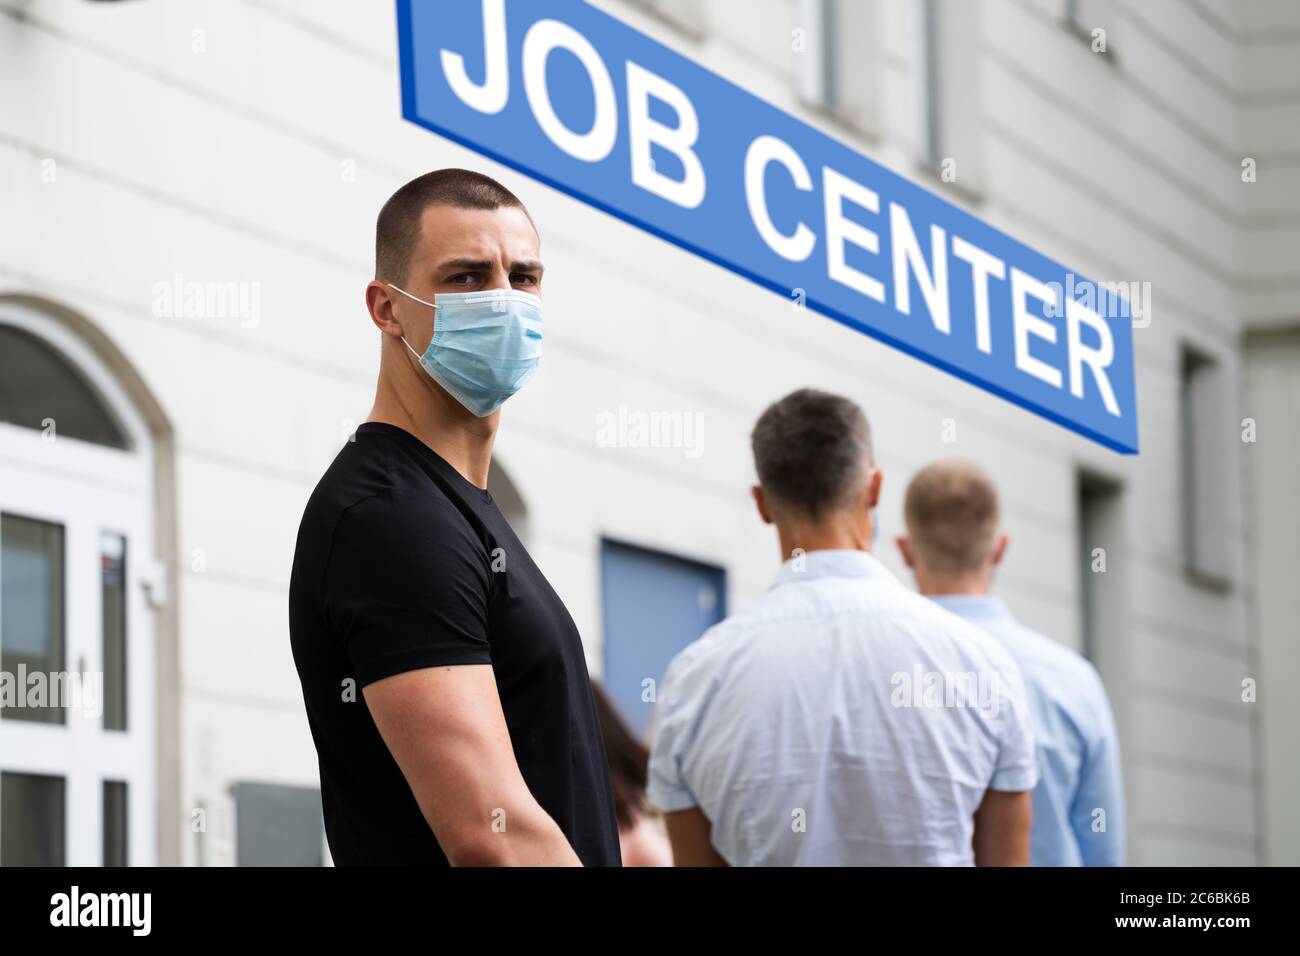 Job Center Line Of Jobless Unemployed Recruitment Seekers With Face Masks Stock Photo